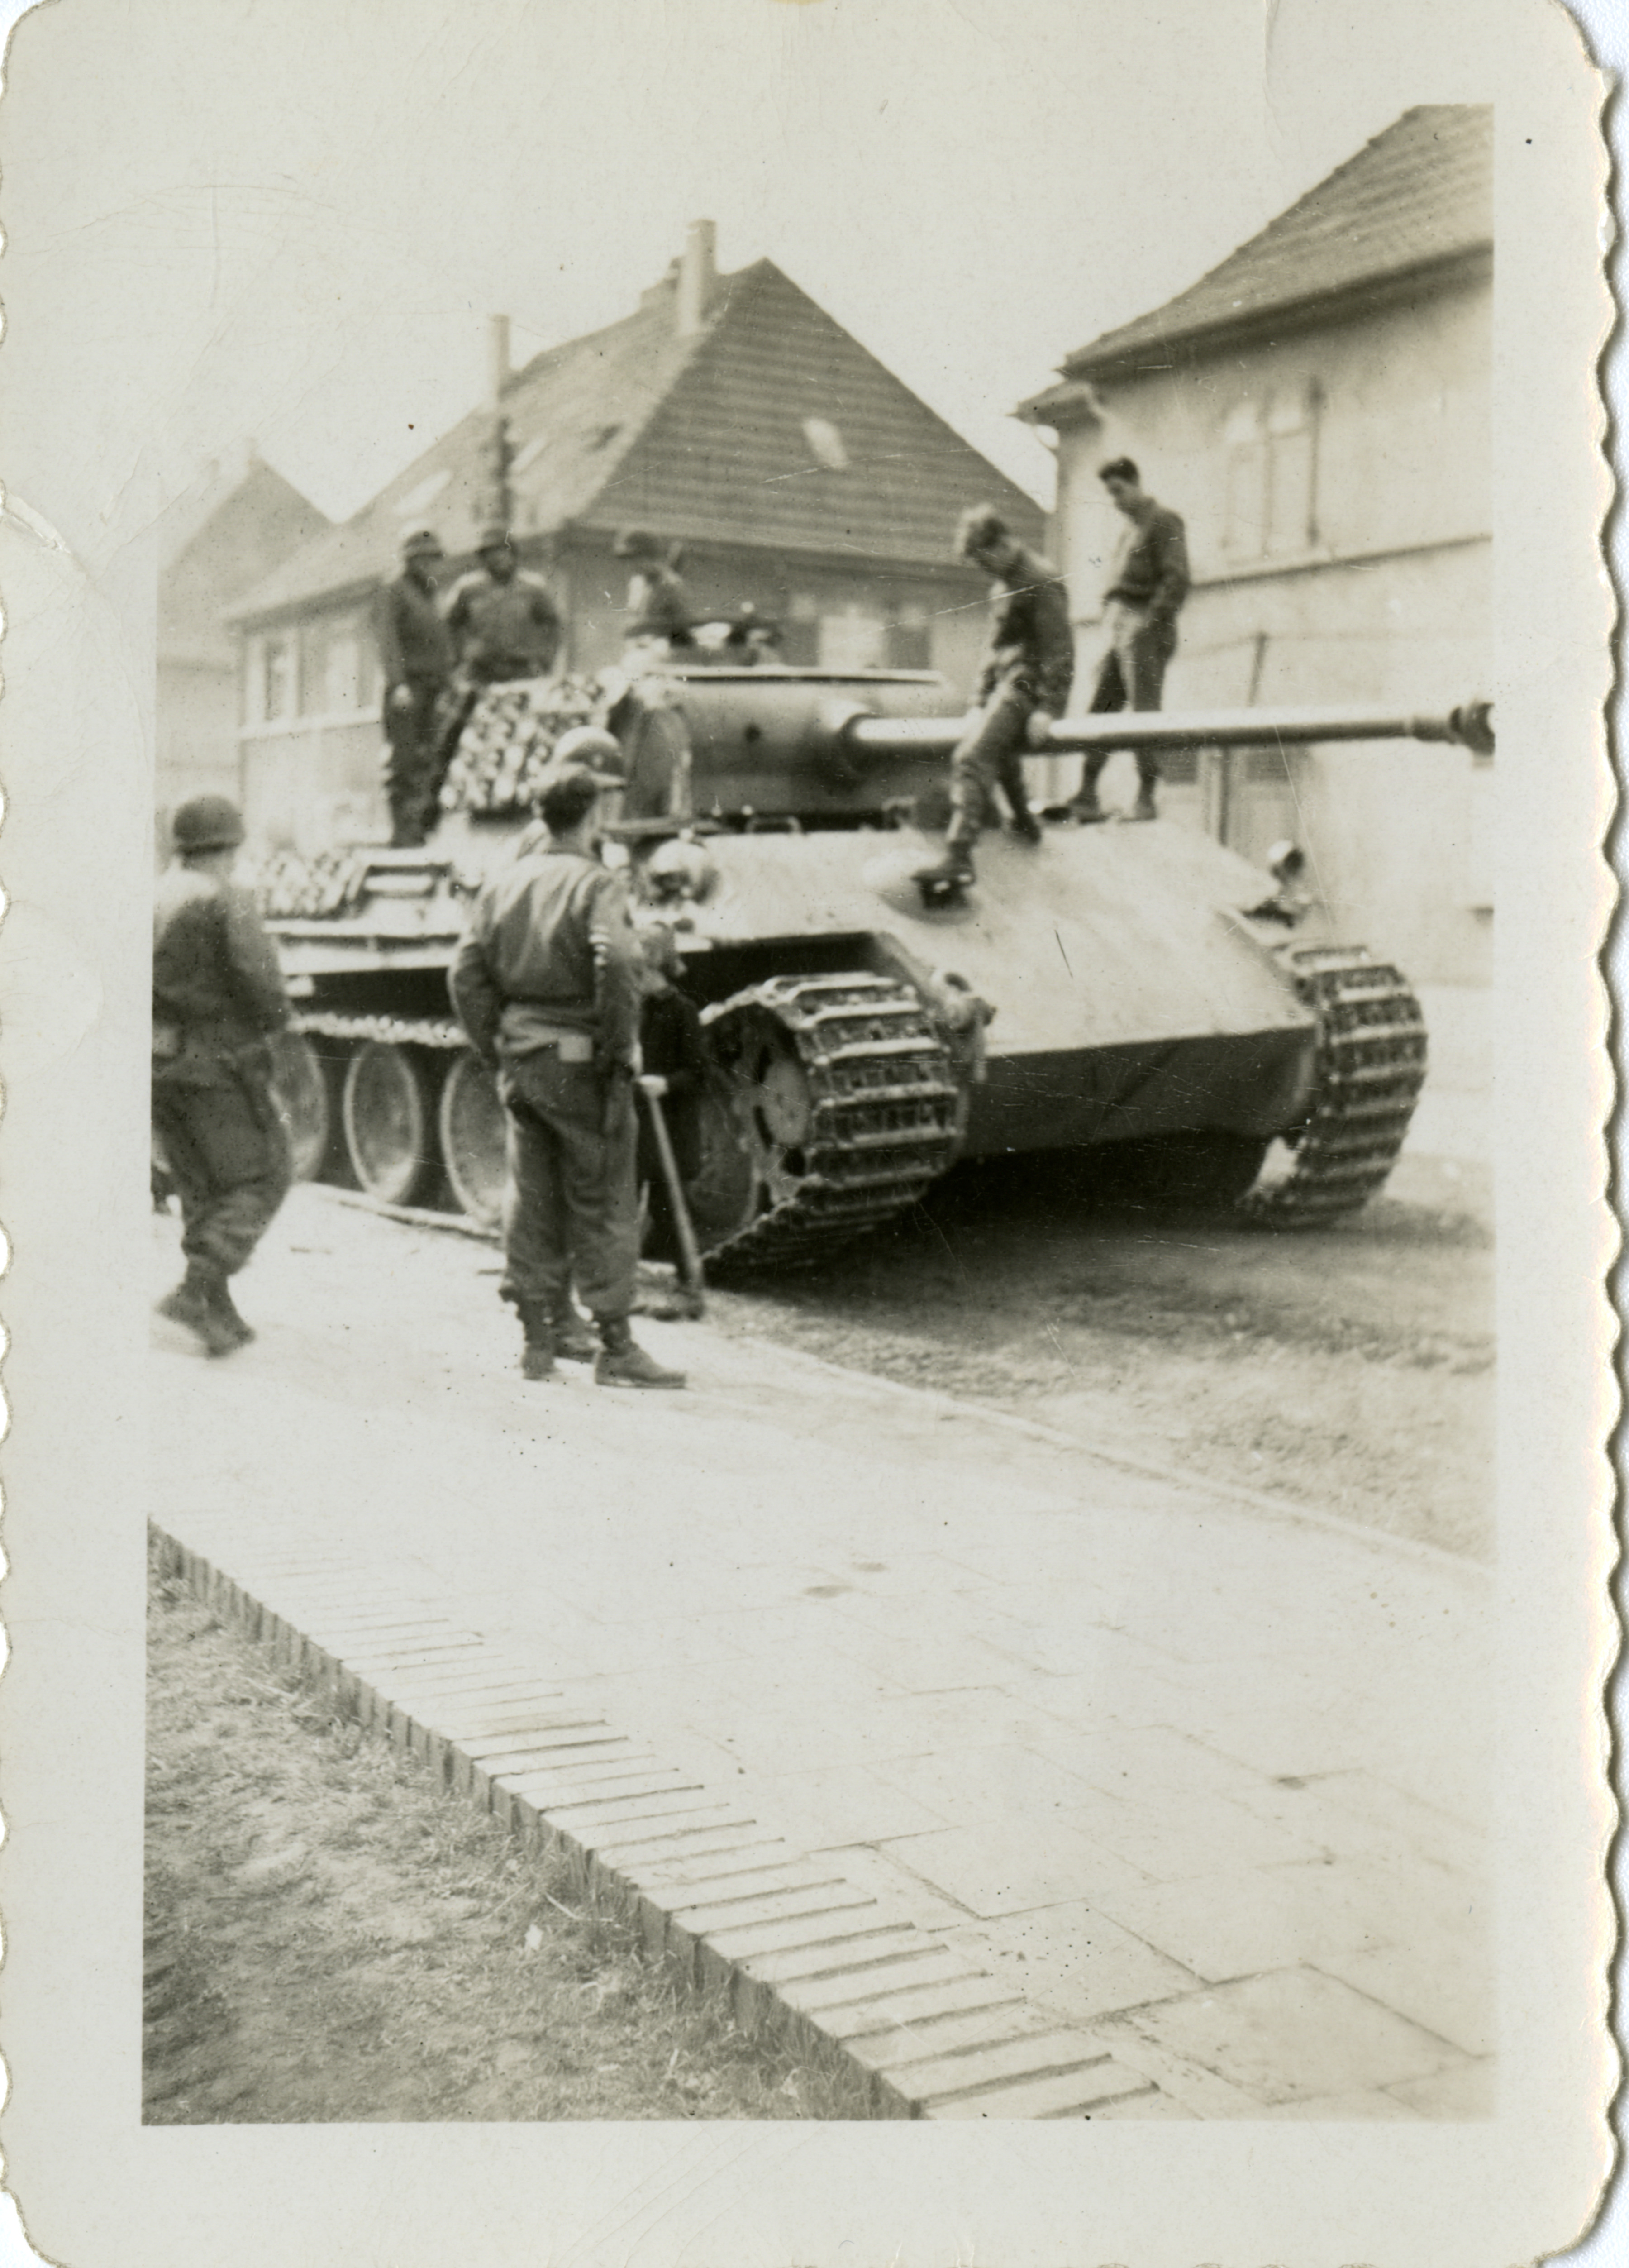 WW2 Picture Photo German personal tank 3093